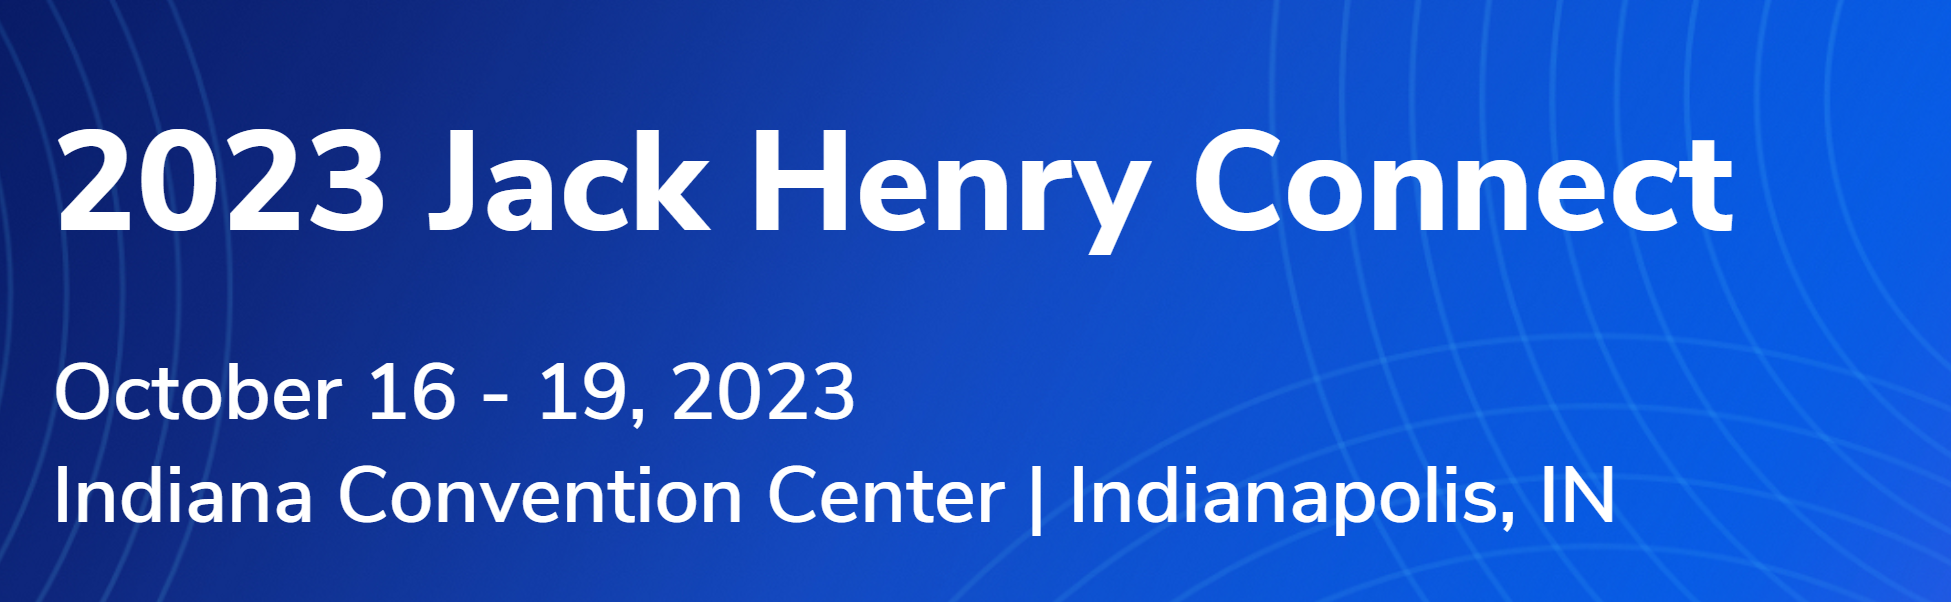 Don't Miss XDI at the 2023 Jack Henry Connect in Indianapolis!